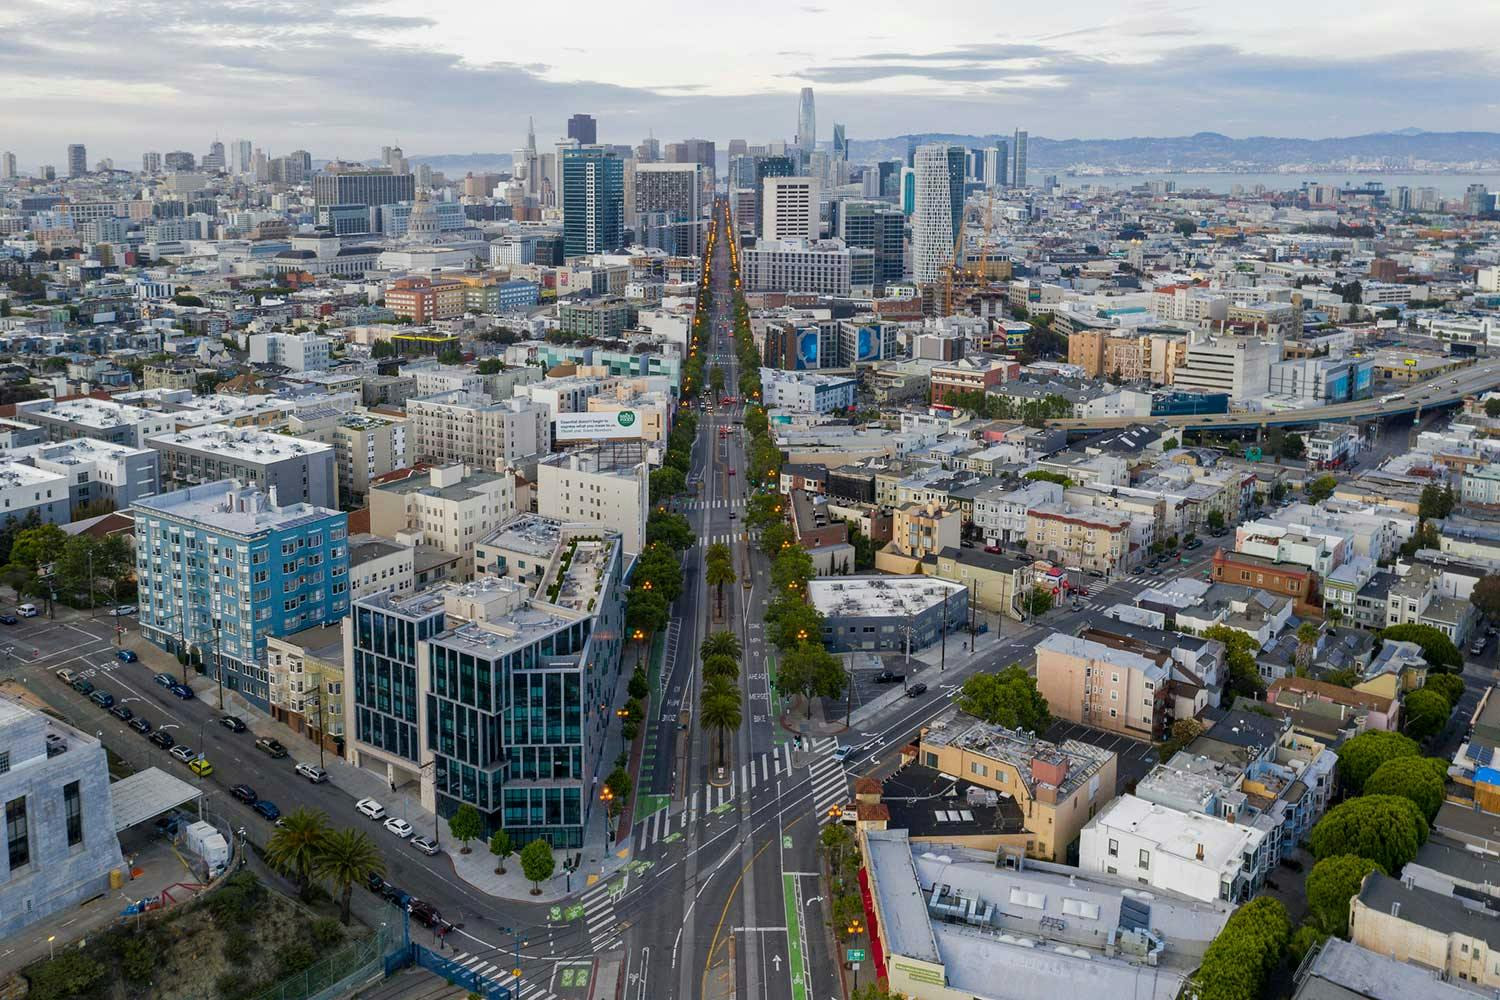 Aerial view of Market Street in San Francisco, during the Covid-19 lockdown, devoid of people and cars.